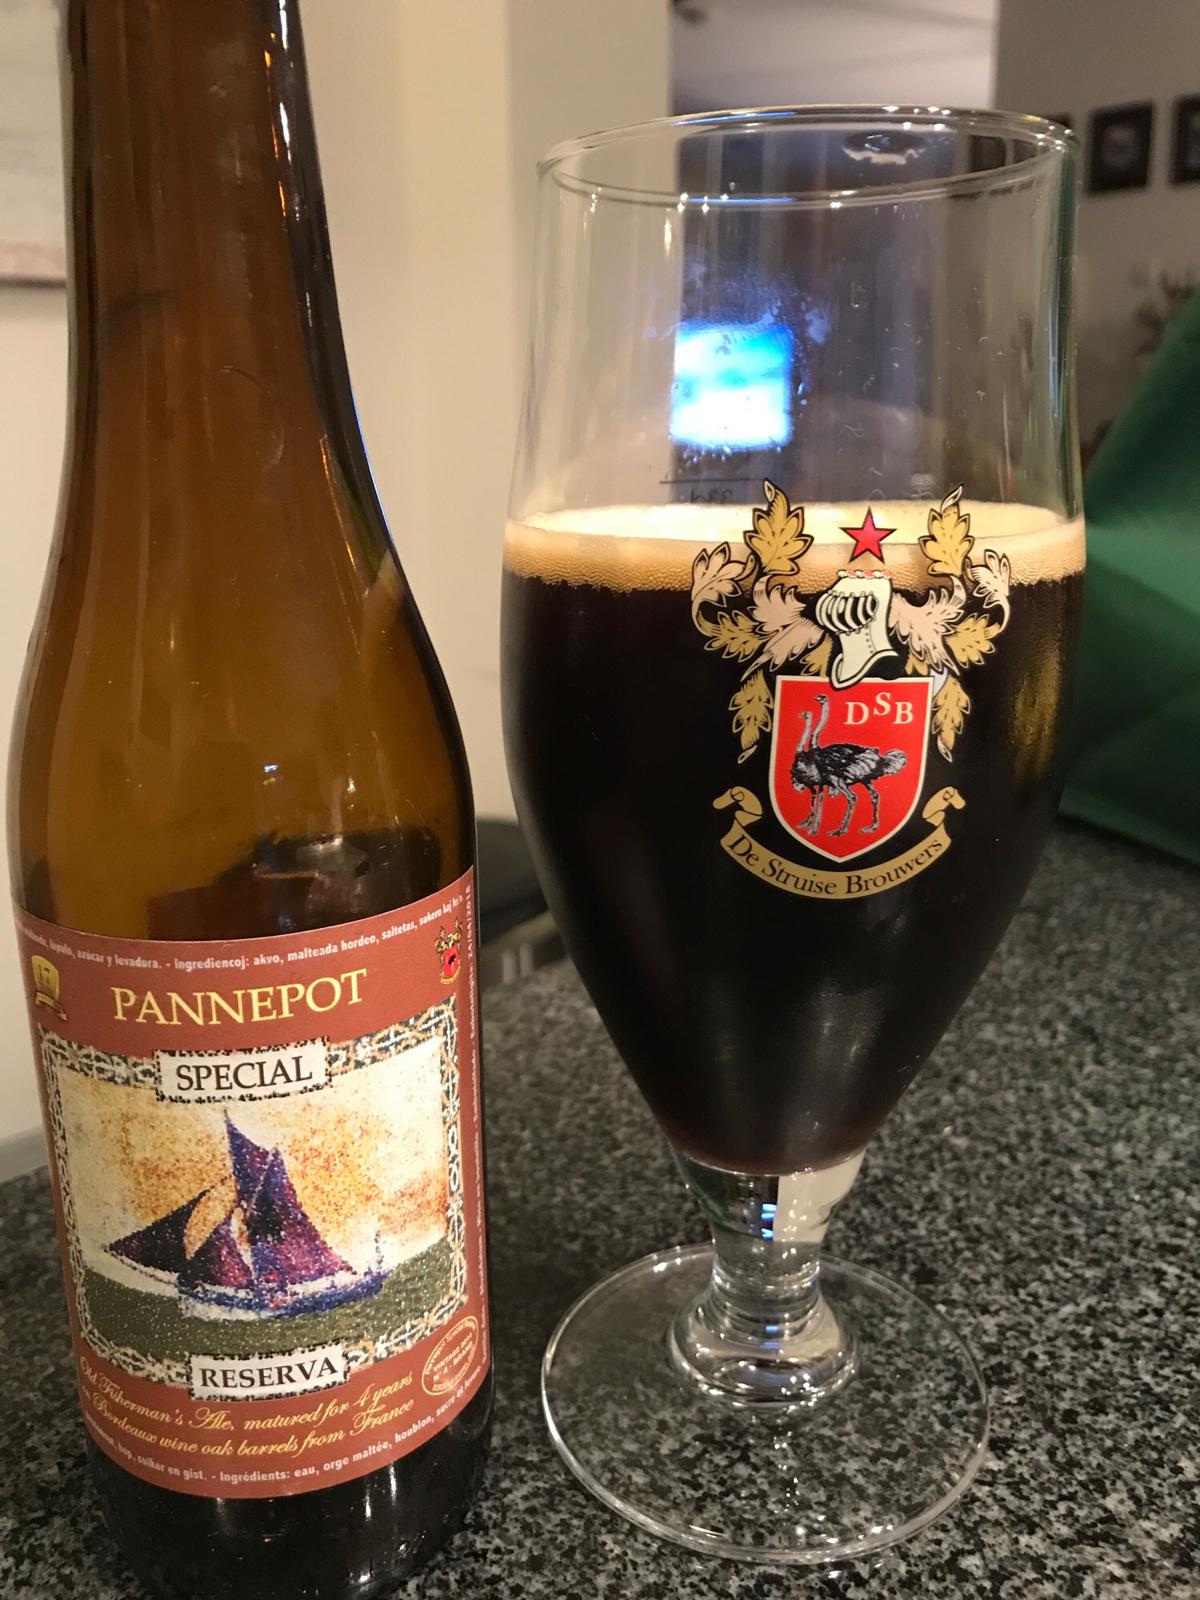 Pannepot Special Reserve